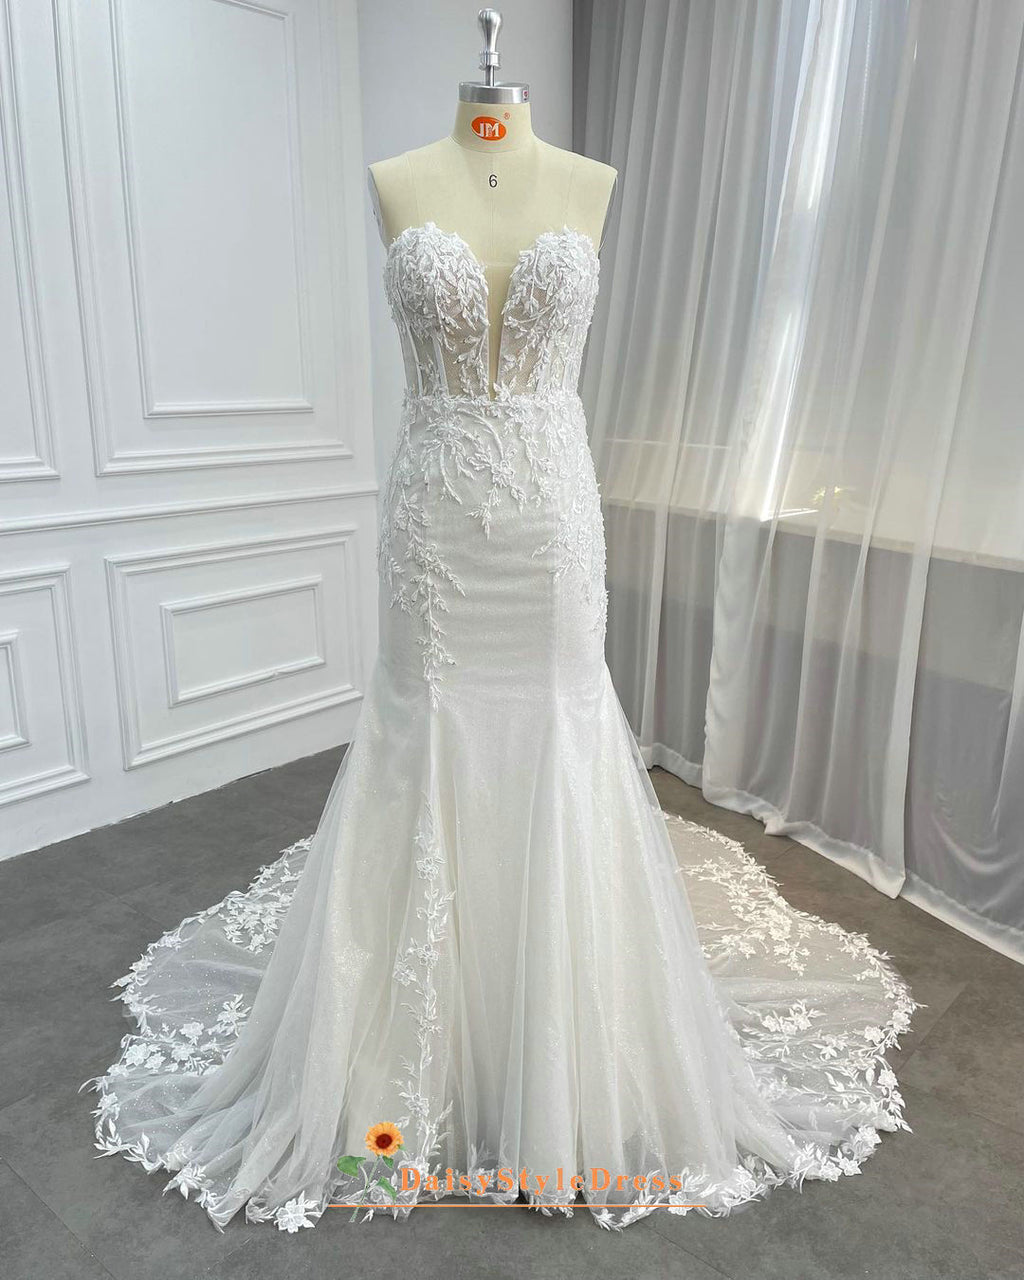 fit and flare wedding dress